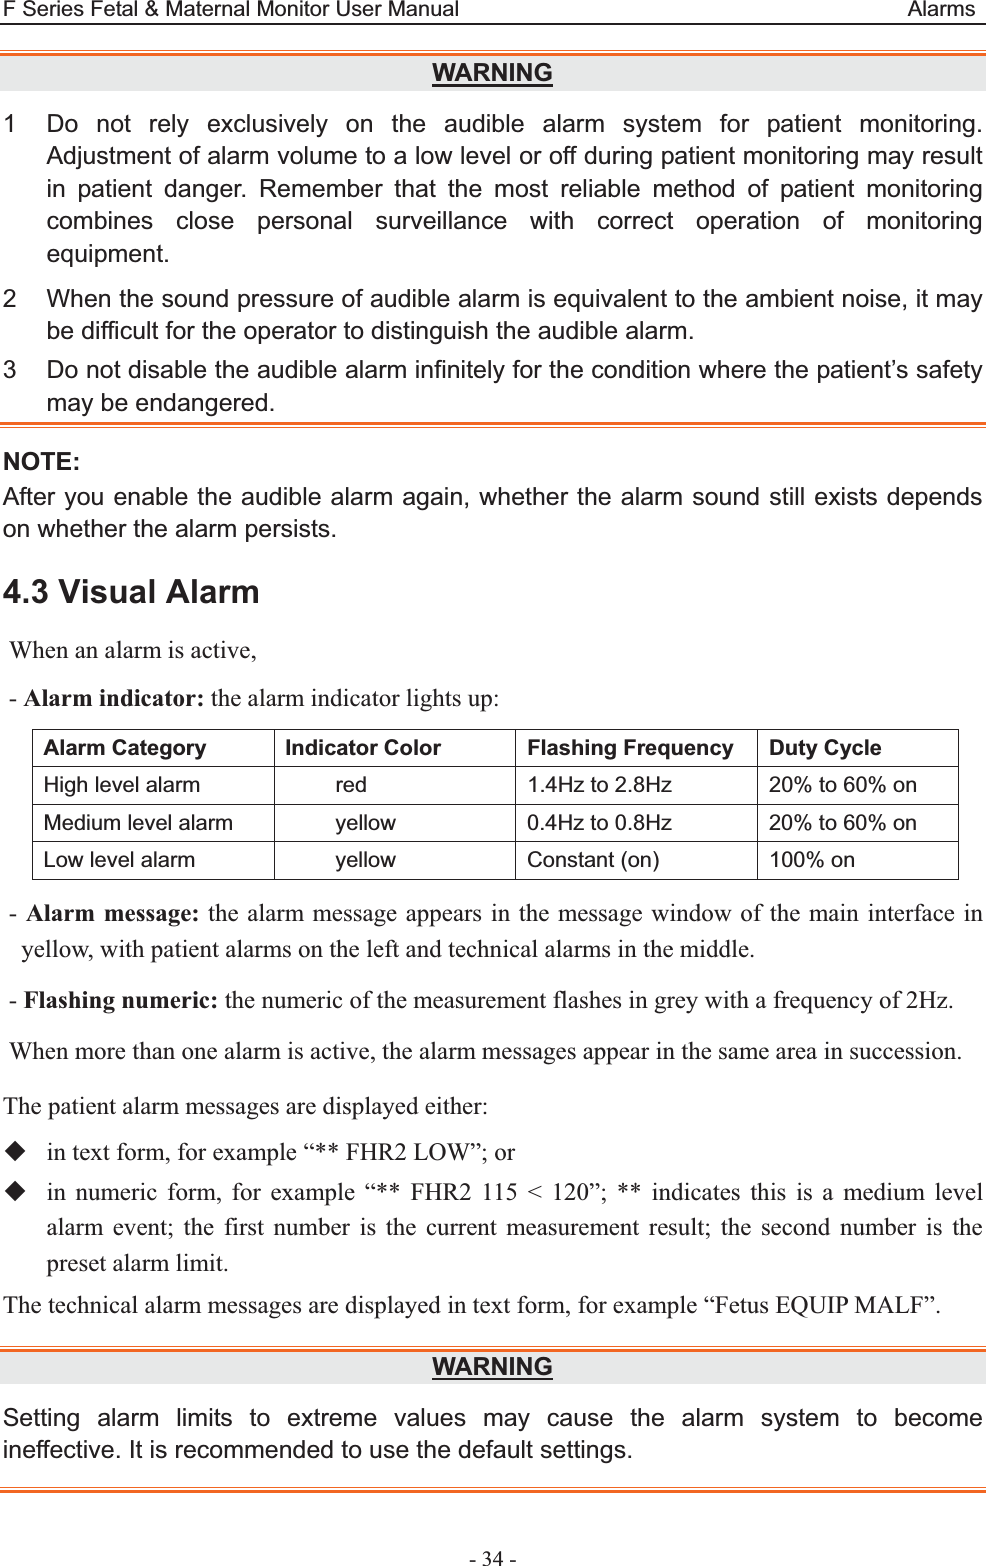 F Series Fetal &amp; Maternal Monitor User Manual                                         Alarms - 34 - WARNING1  Do not rely exclusively on the audible alarm system for patient monitoring. Adjustment of alarm volume to a low level or off during patient monitoring may result in patient danger. Remember that the most reliable method of patient monitoring combines close personal surveillance with correct operation of monitoring equipment. 2  When the sound pressure of audible alarm is equivalent to the ambient noise, it may be difficult for the operator to distinguish the audible alarm. 3  Do not disable the audible alarm infinitely for the condition where the patient’s safety may be endangered. NOTE:After you enable the audible alarm again, whether the alarm sound still exists depends on whether the alarm persists. 4.3 Visual Alarm When an alarm is active, - Alarm indicator: the alarm indicator lights up: Alarm Category  Indicator Color  Flashing Frequency  Duty Cycle High level alarm  red  1.4Hz to 2.8Hz  20% to 60% on Medium level alarm  yellow  0.4Hz to 0.8Hz  20% to 60% on Low level alarm  yellow  Constant (on)  100% on - Alarm message: the alarm message appears in the message window of the main interface in yellow, with patient alarms on the left and technical alarms in the middle. - Flashing numeric: the numeric of the measurement flashes in grey with a frequency of 2Hz. When more than one alarm is active, the alarm messages appear in the same area in succession. The patient alarm messages are displayed either:  in text form, for example “** FHR2 LOW”; or  in numeric form, for example “** FHR2 115 &lt; 120”; ** indicates this is a medium level alarm event; the first number is the current measurement result; the second number is the preset alarm limit. The technical alarm messages are displayed in text form, for example “Fetus EQUIP MALF”. WARNINGSetting alarm limits to extreme values may cause the alarm system to become ineffective. It is recommended to use the default settings.   